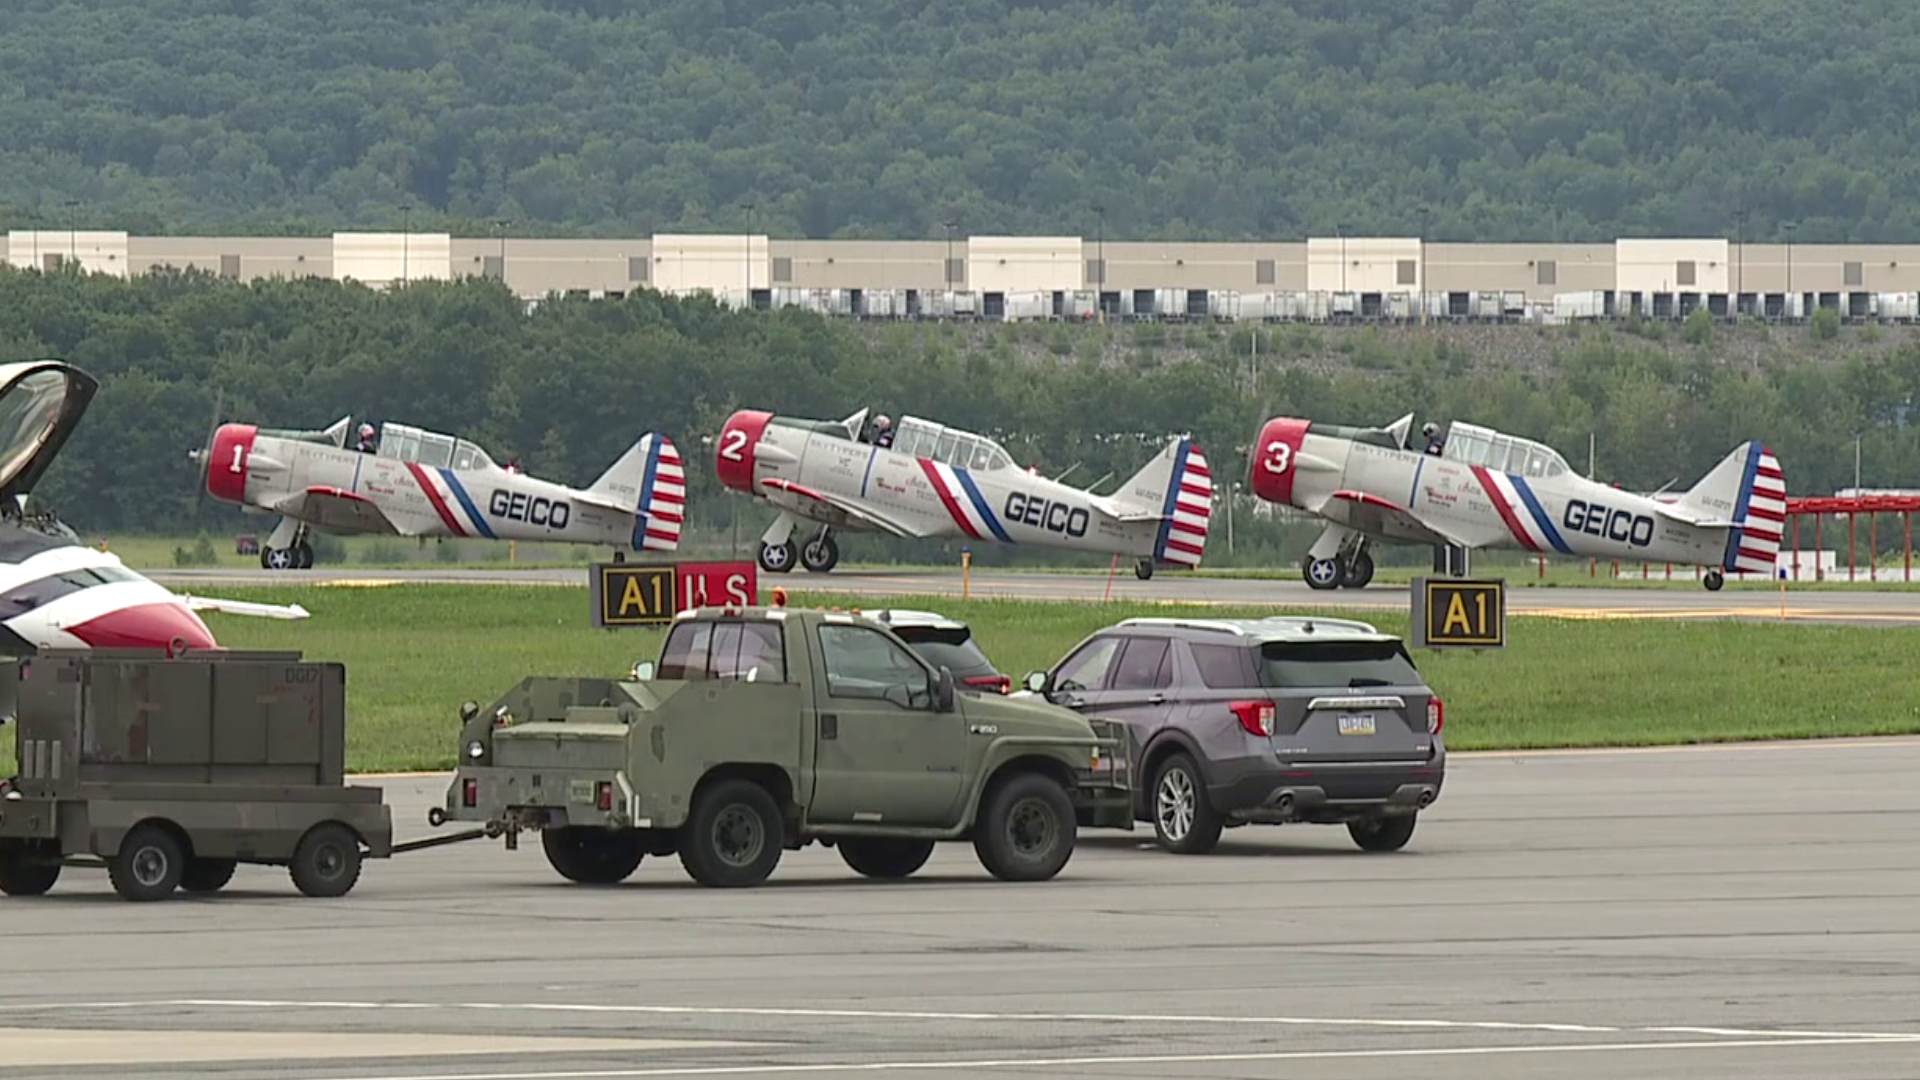 This weekend, the pilot was set to perform with GEICO Skytypers Airshow Team at The Great Pocono Raceway Airshow.